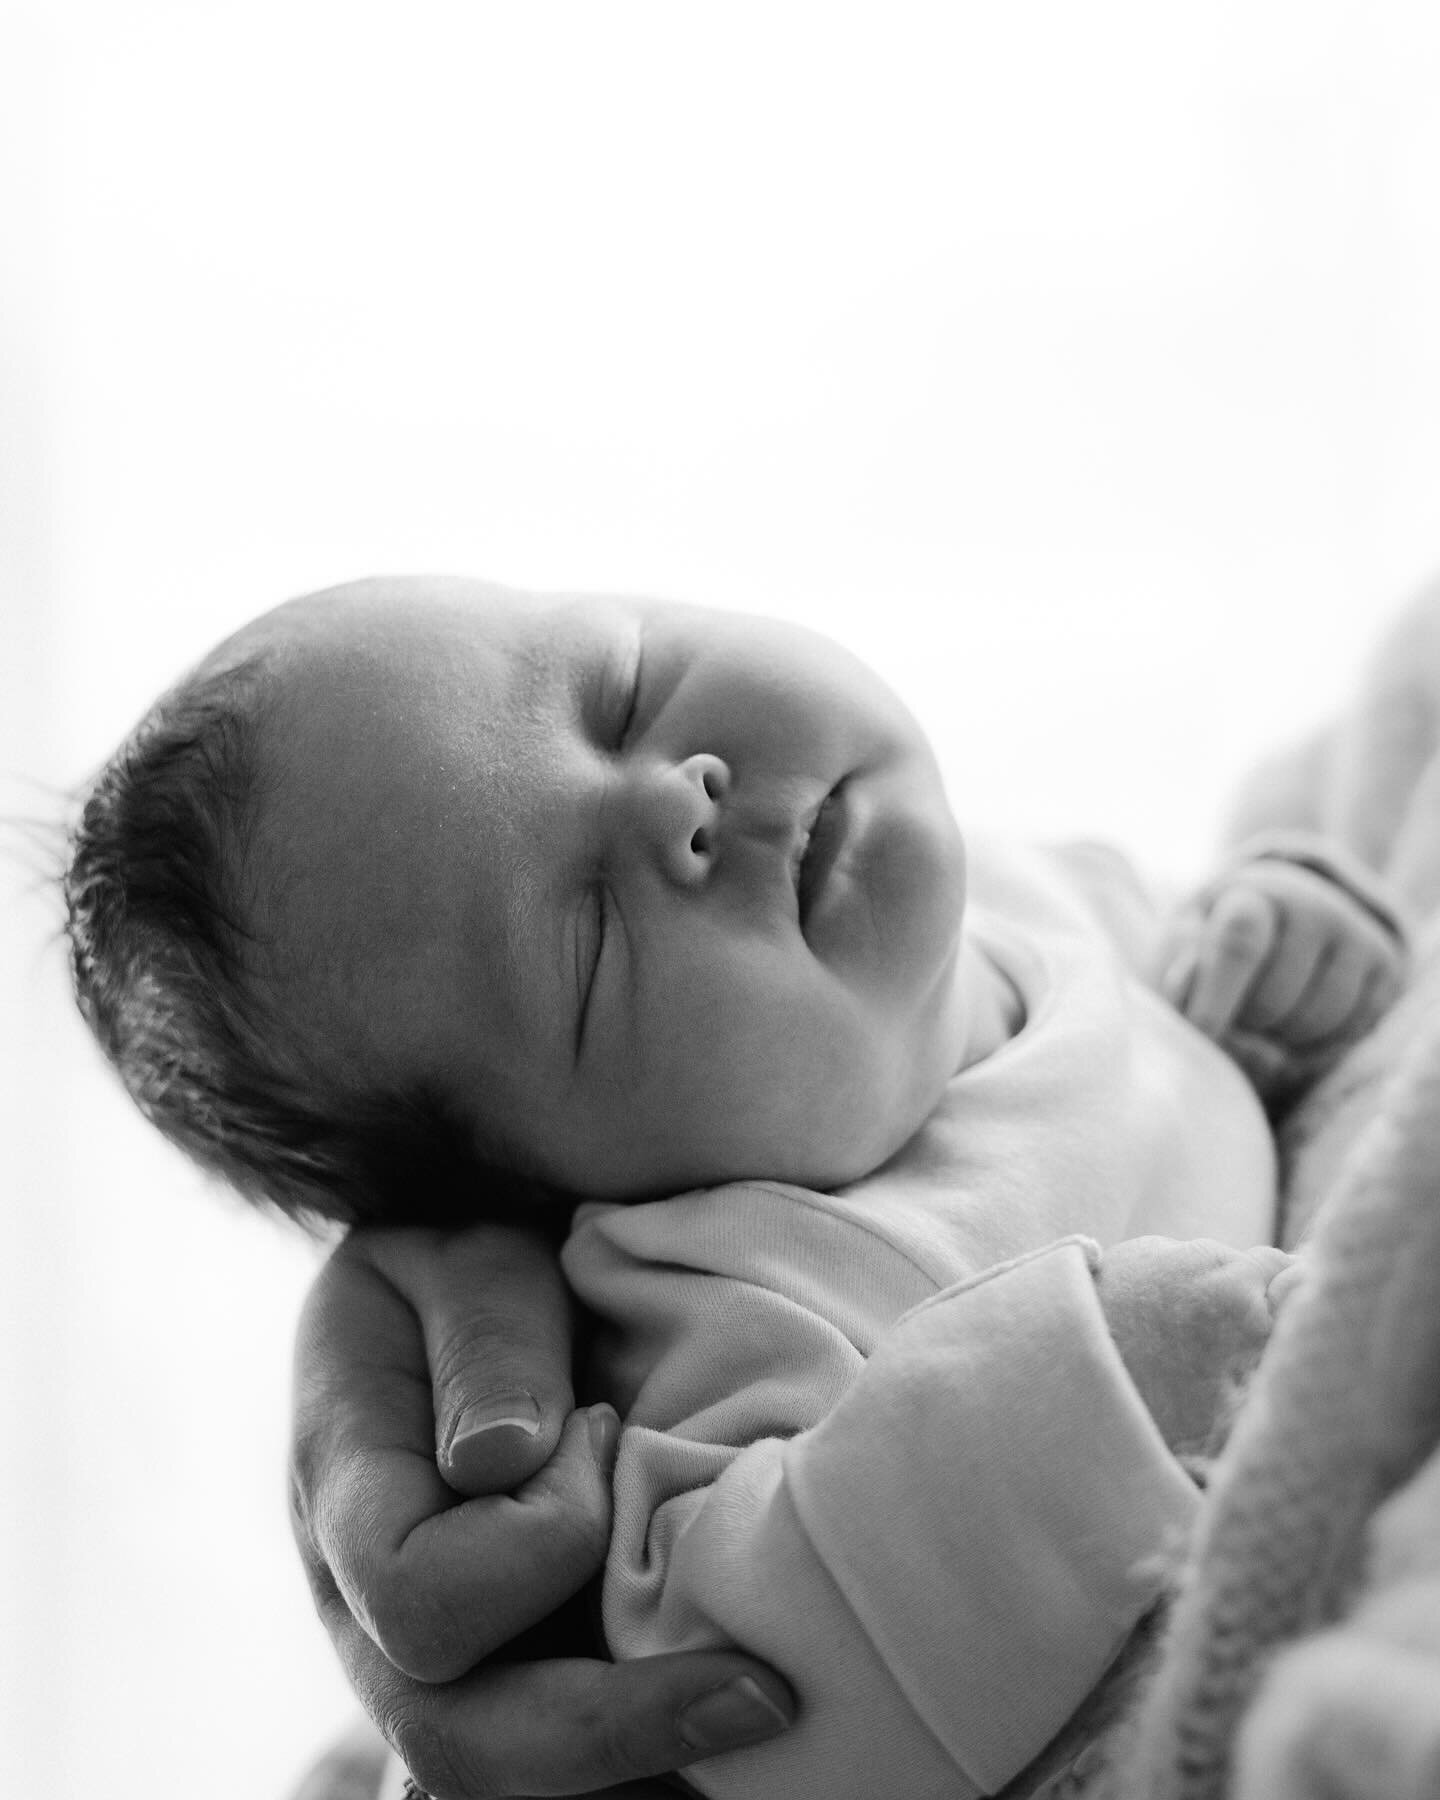 Another couple of special moments from this at-home newborn shoot.
🤍

#naturalnewbornphotography#newbornphotography #athomenewbornphotography #thelifestylecollective #monochromaticlens #naturallightnewbornphotography #naturalfamilyphotography #authe